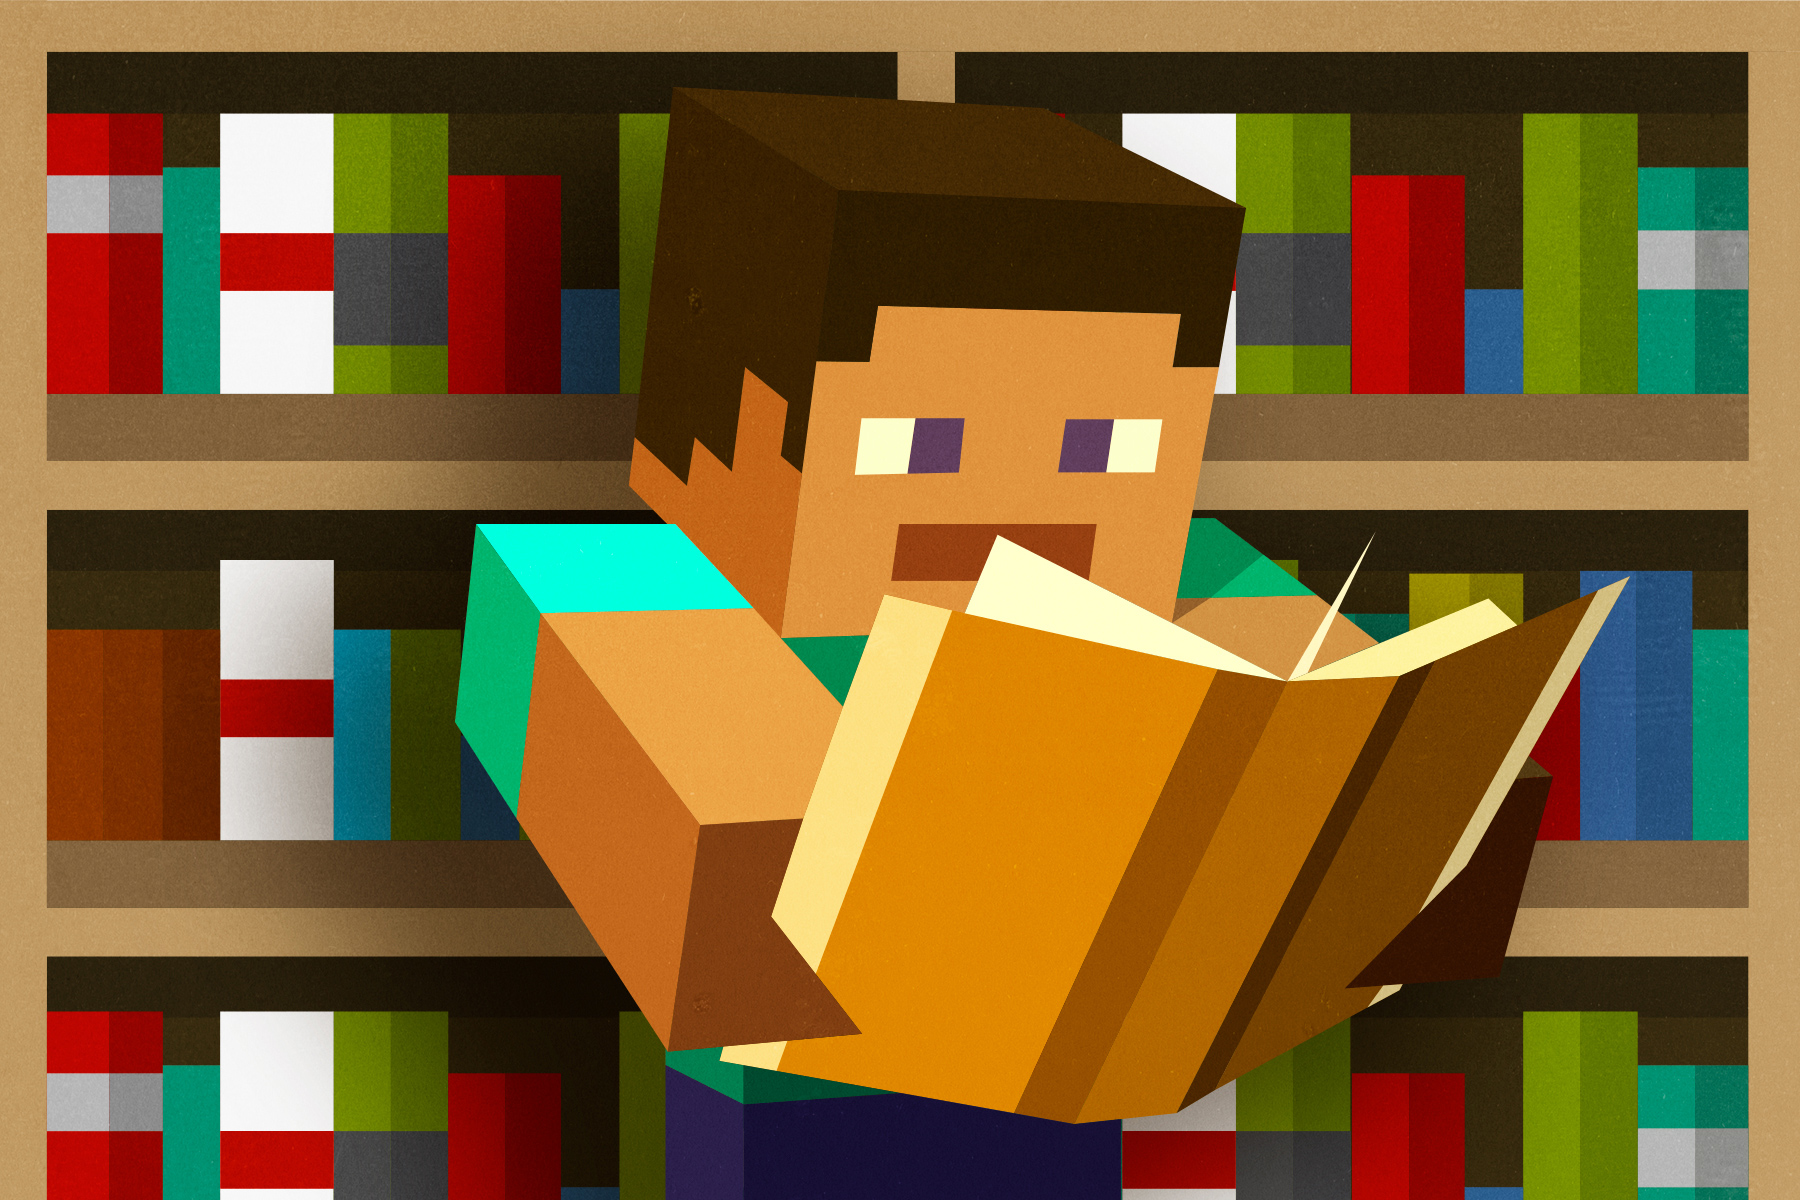 An illustration of a man reading, drawn in the style of the video game Minecraft.